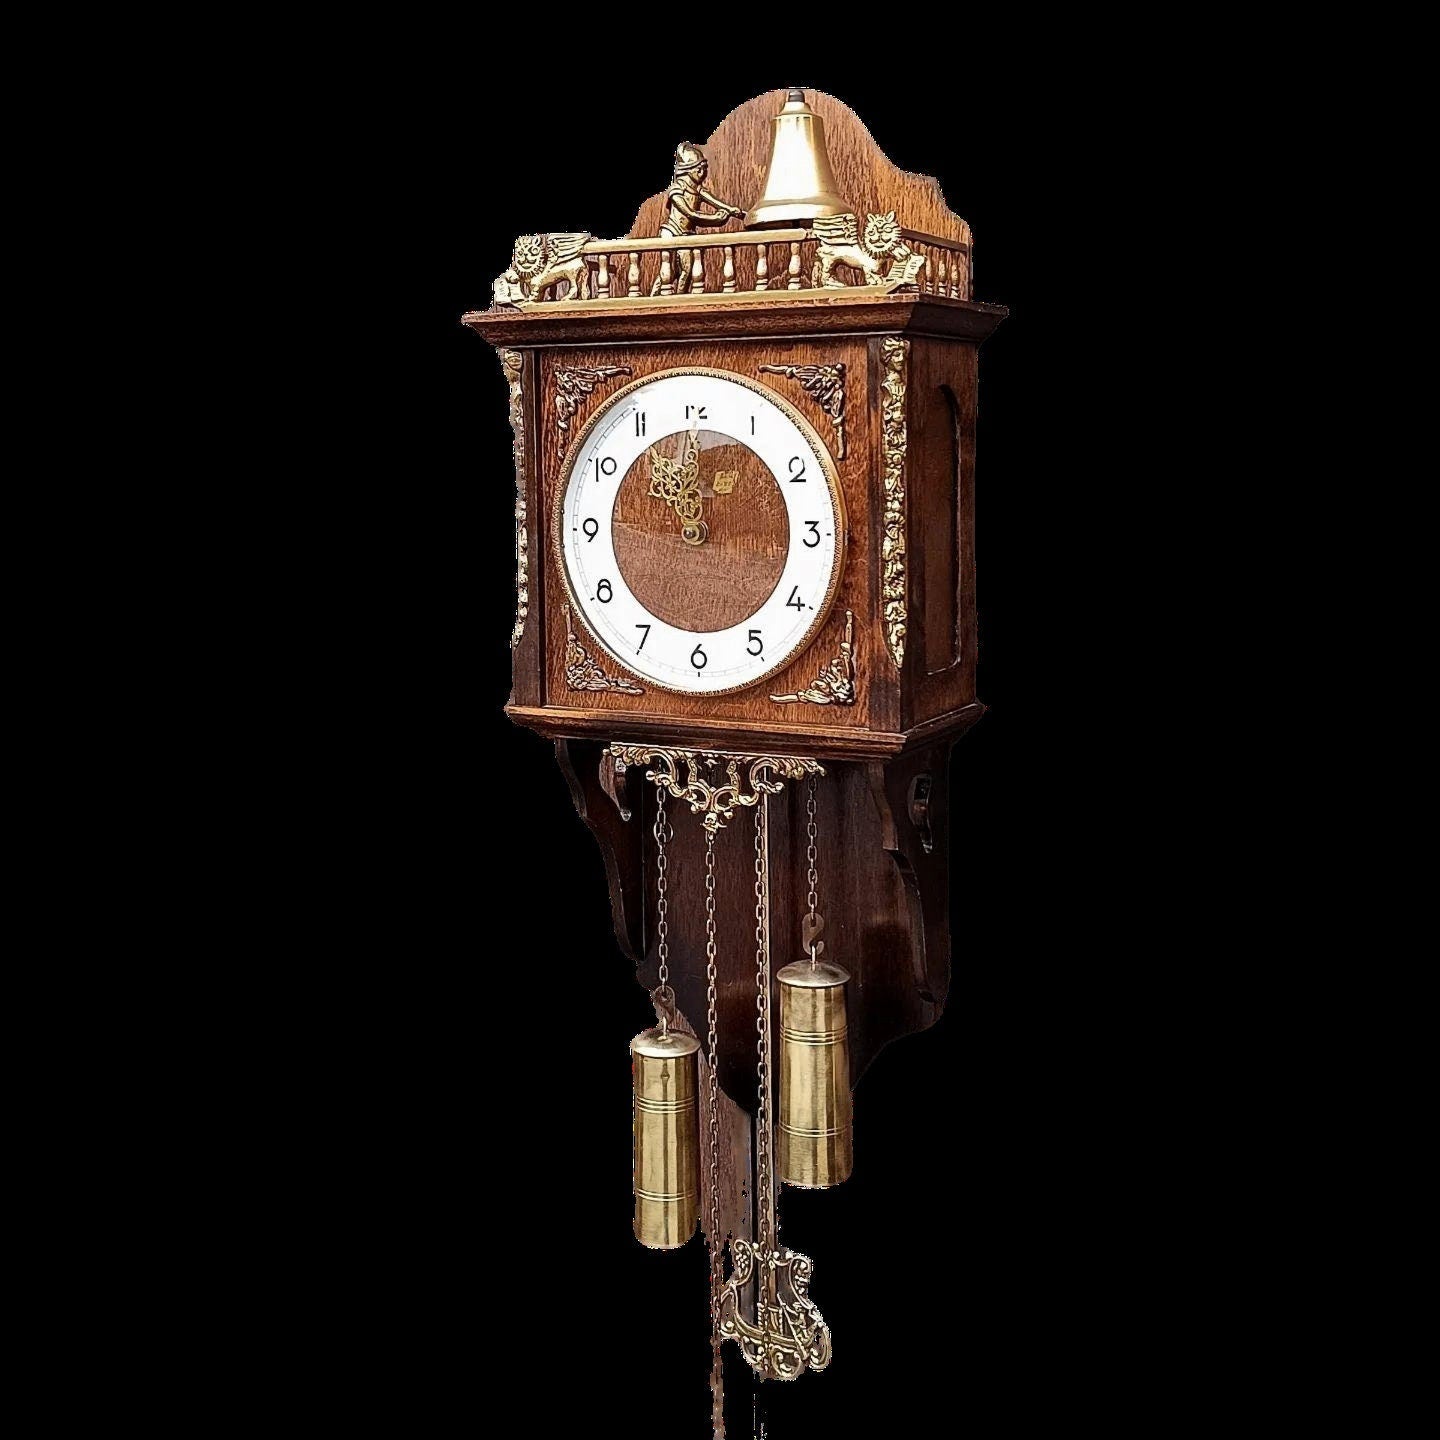 Antique Balcanto Wall Clock | French Made | Elegant Wooden Case | Fully Functional | Collectible Timepiece